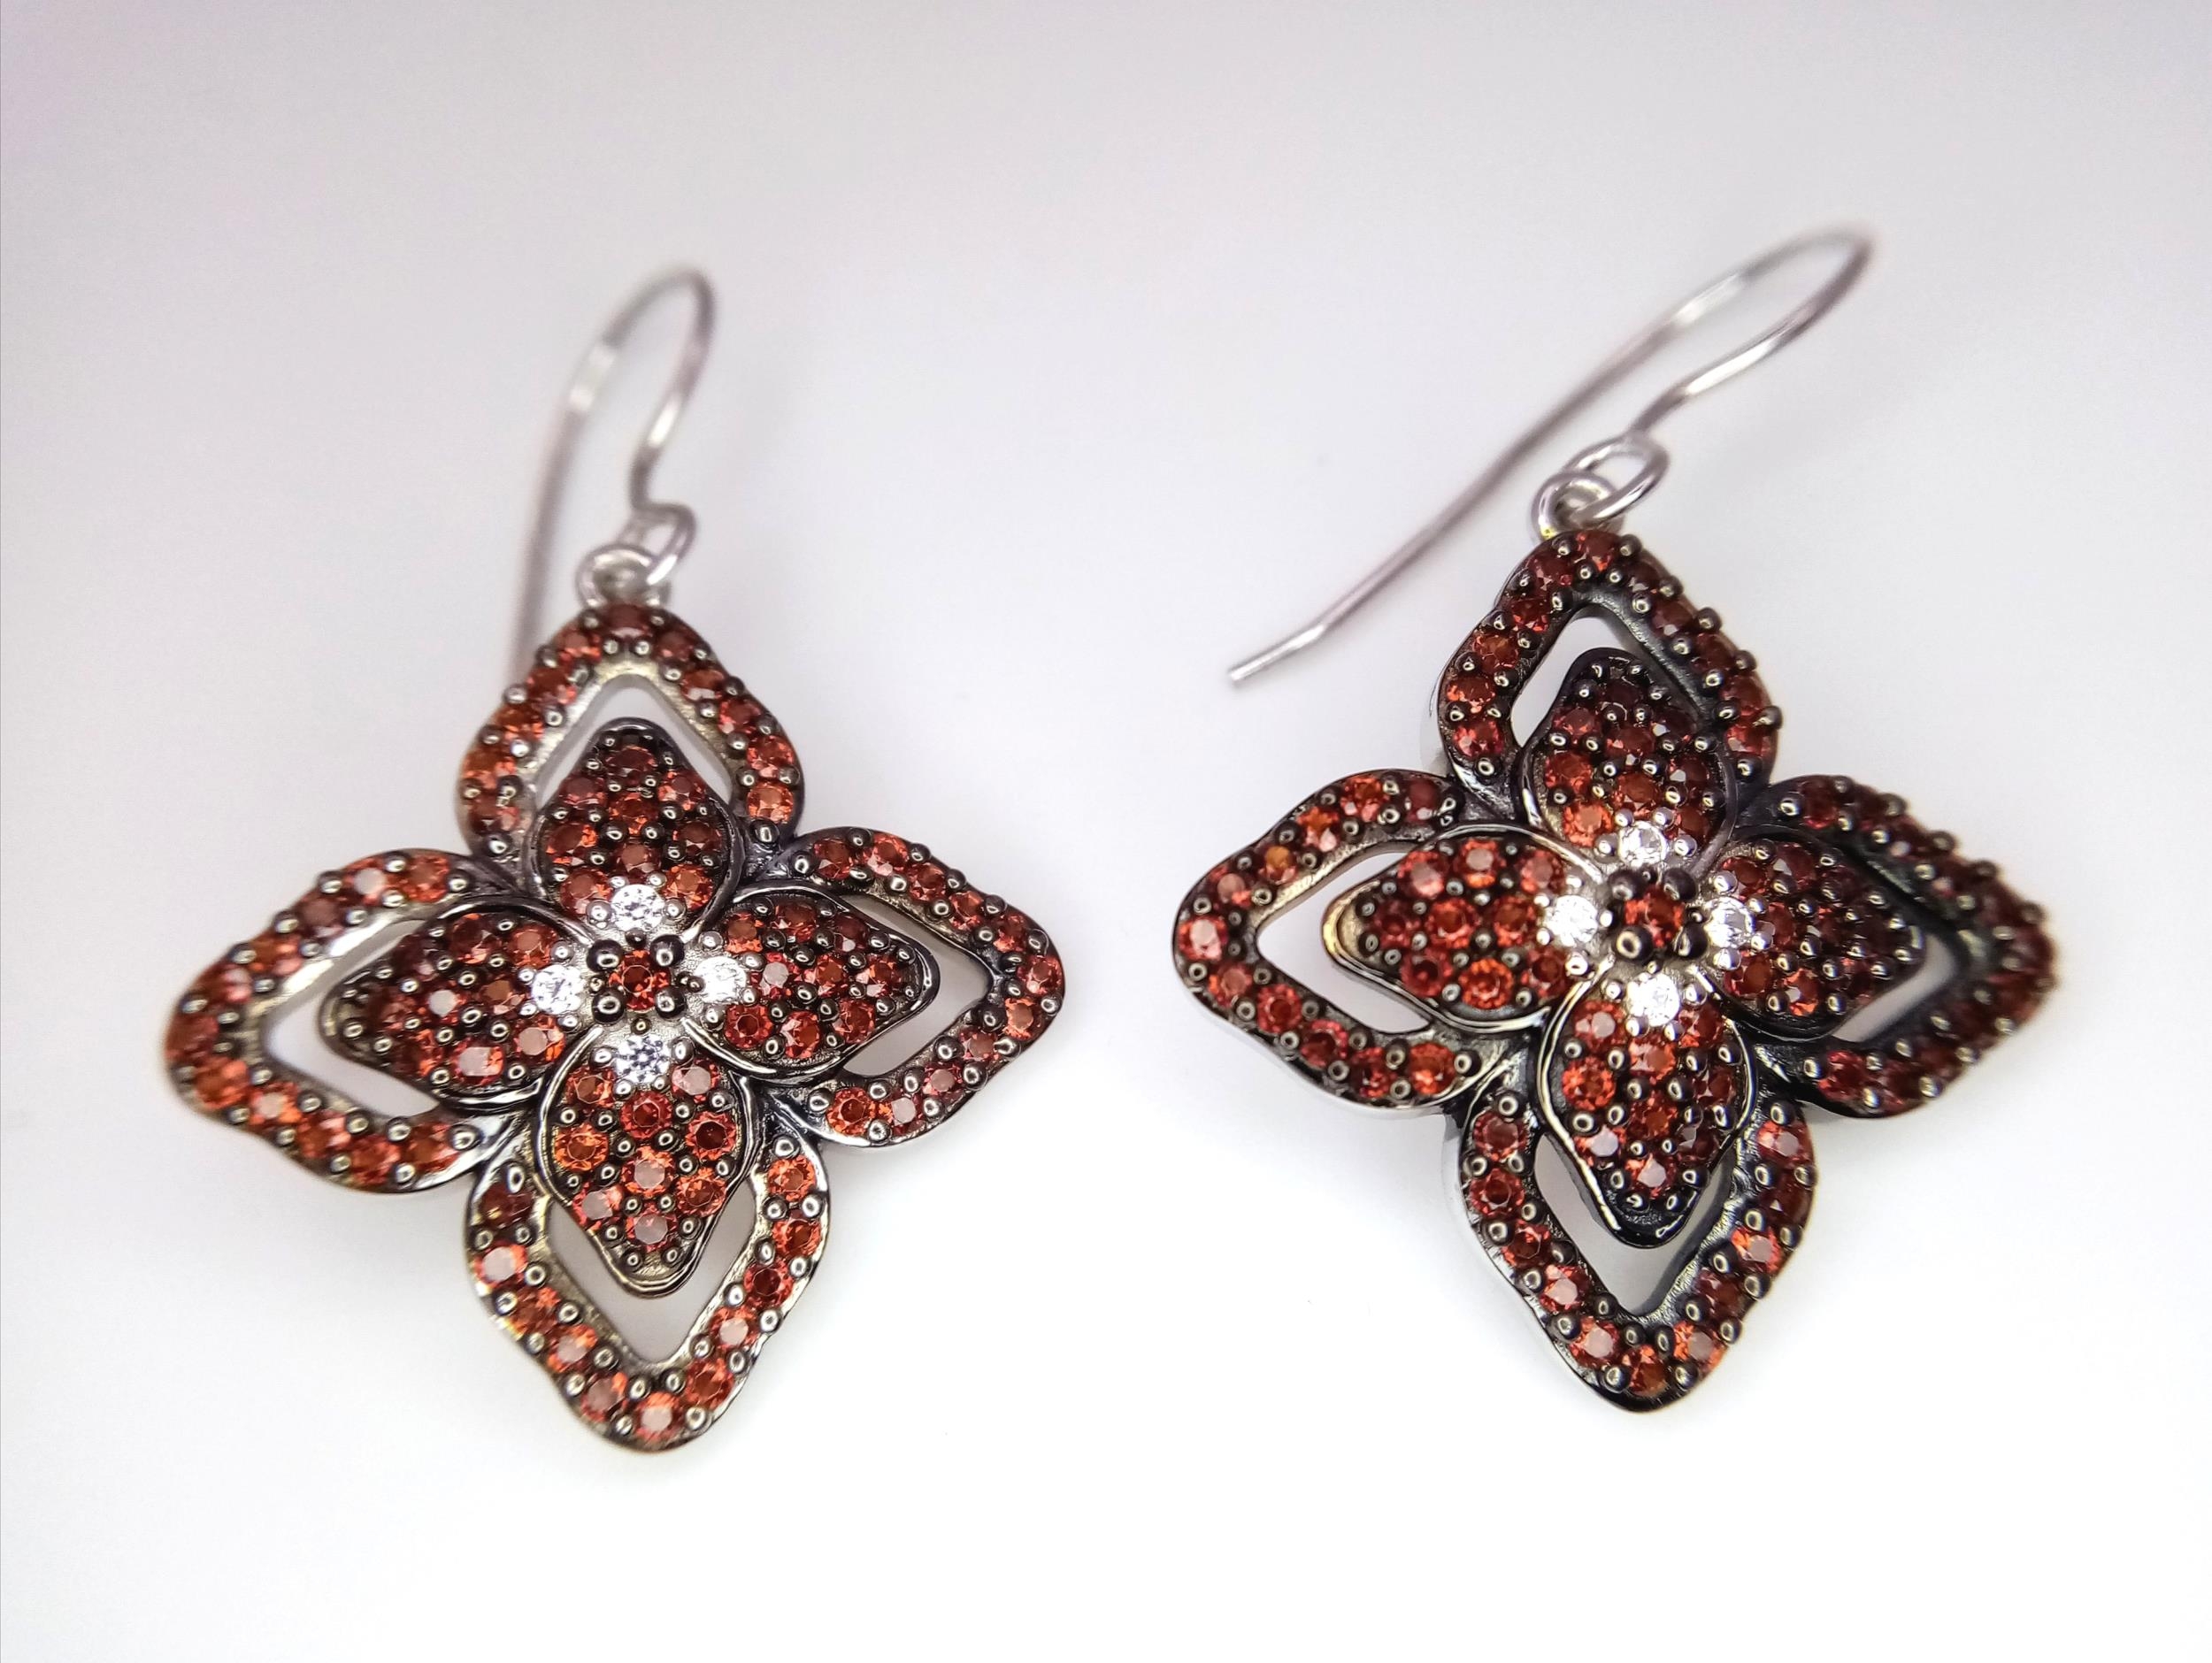 A Stunning Pair of Unworn, Fully Certified Limited Edition (1 of 40,) Sterling Silver Anthill Garnet